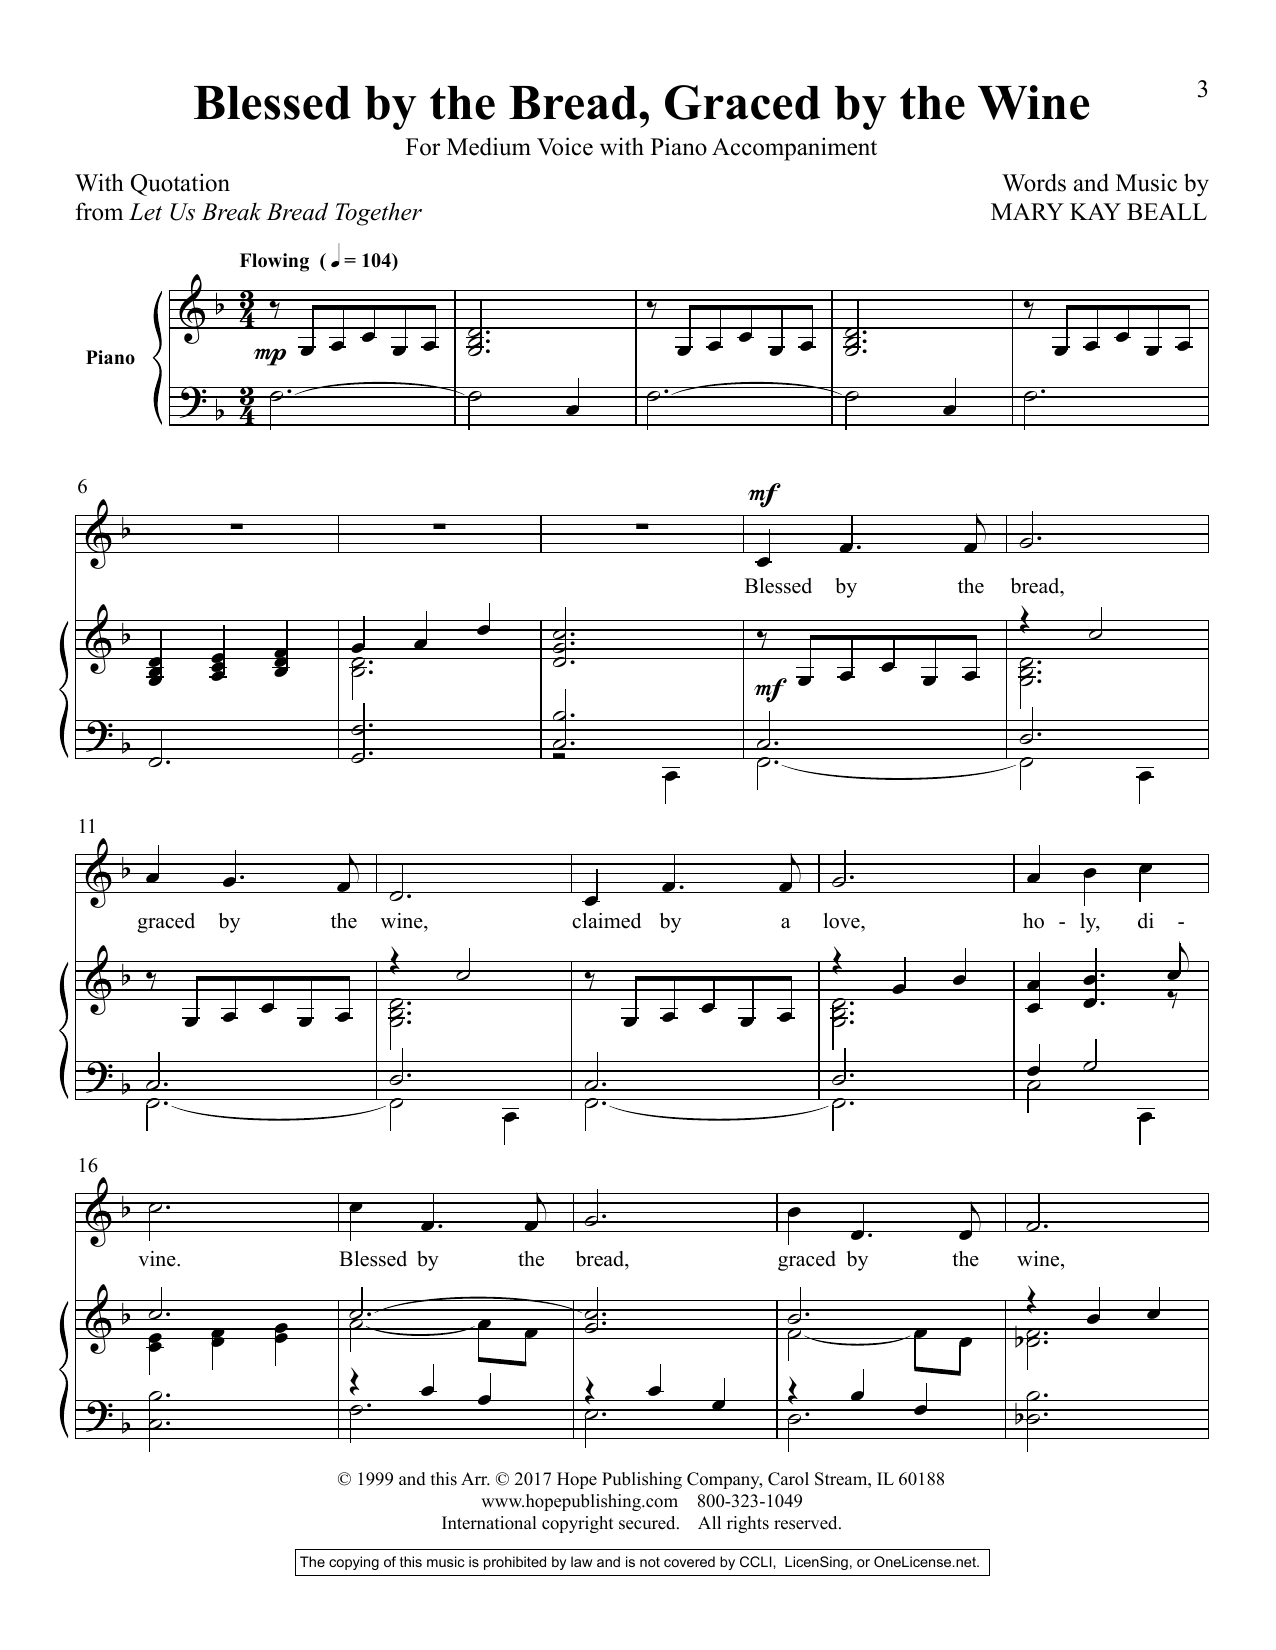 Download Mary Kay Beall Blessed By The Bread, Graced By The Win Sheet Music